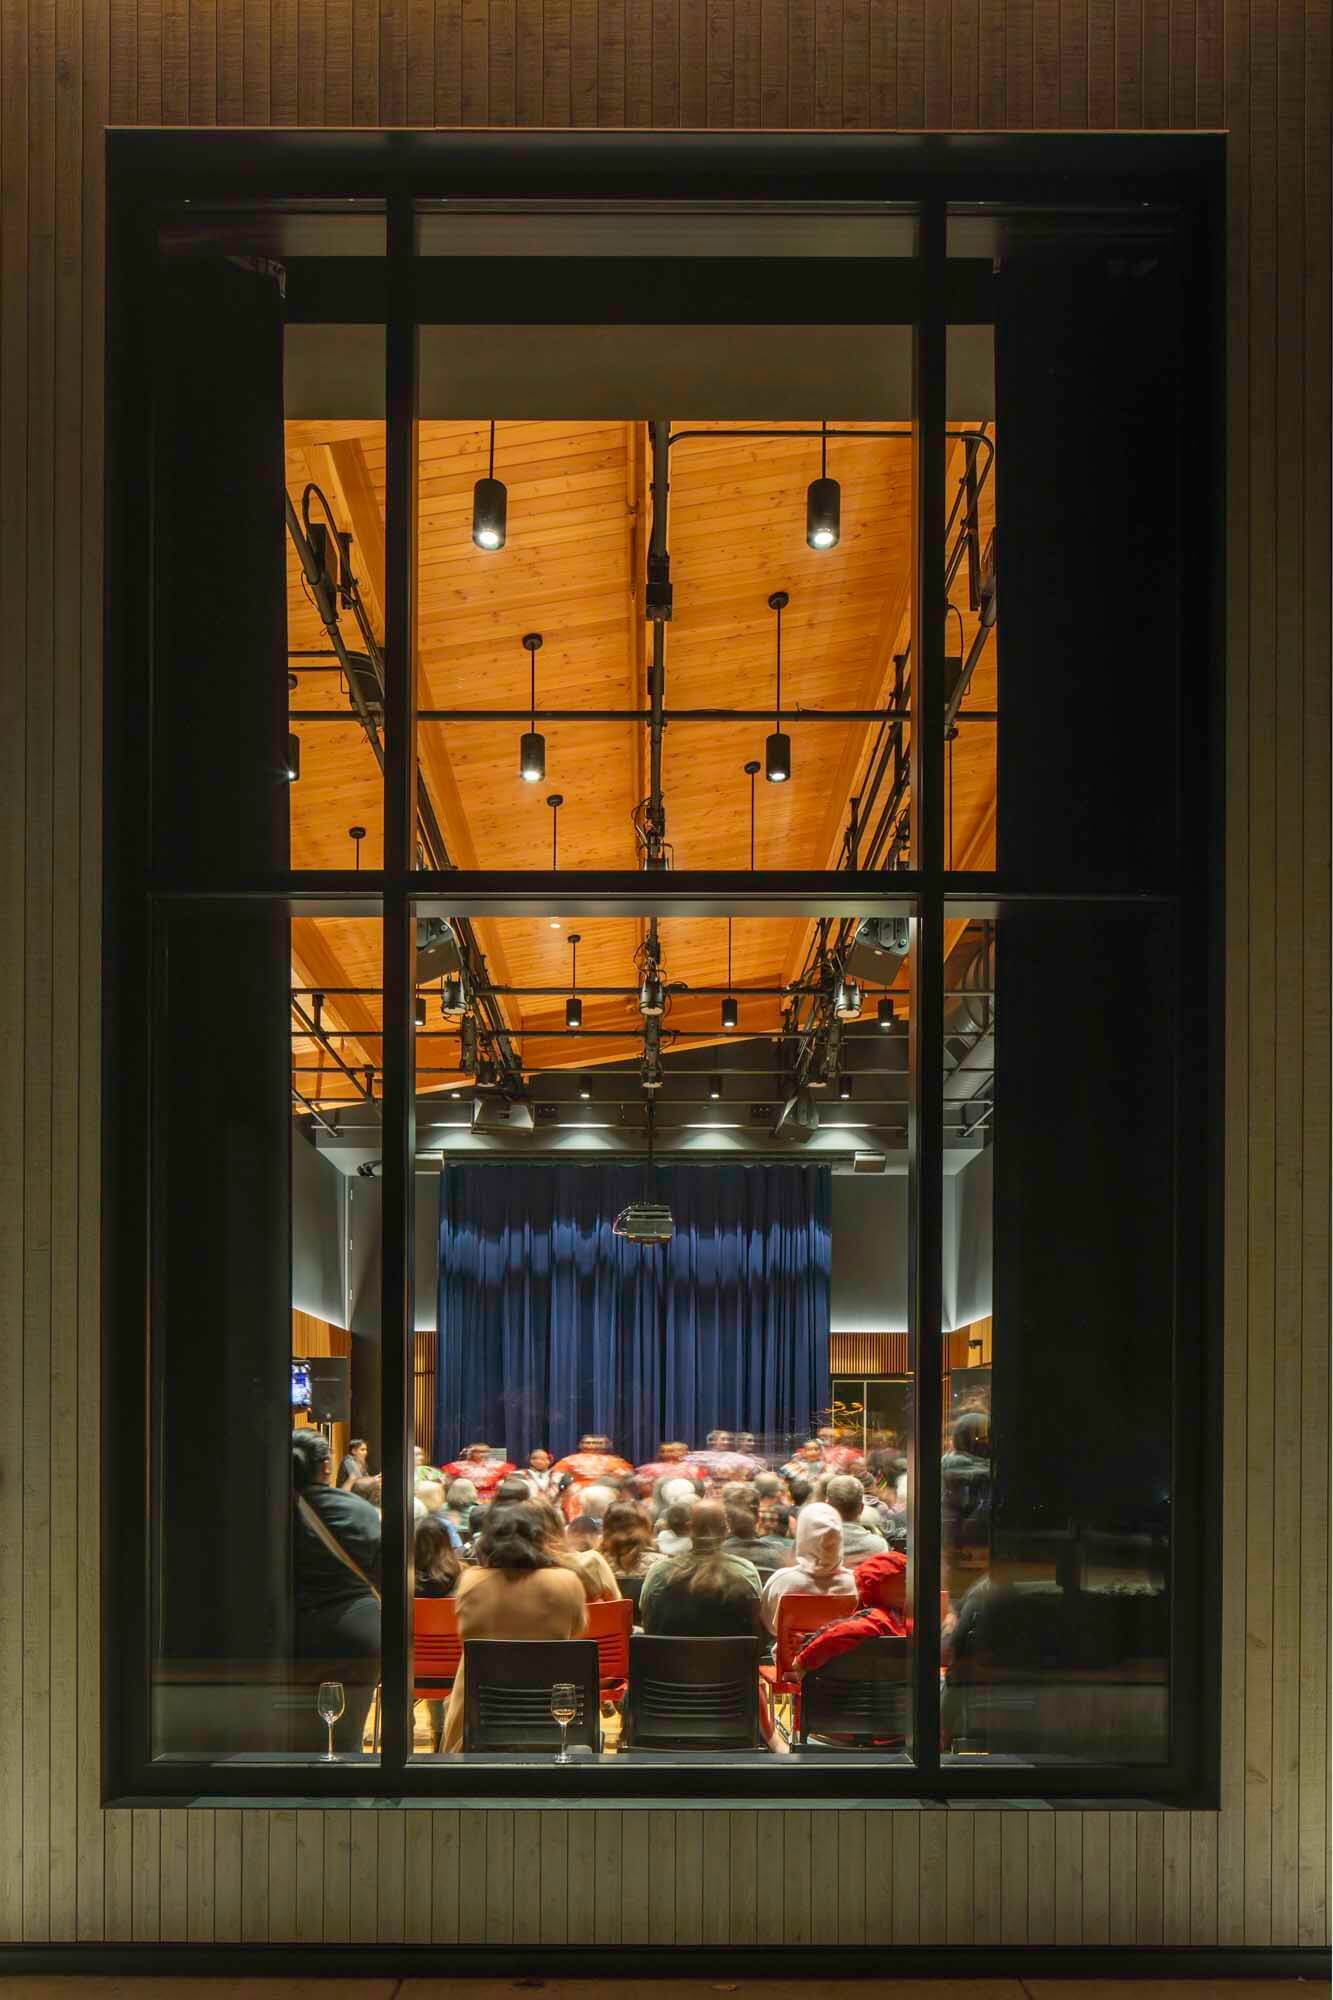 A view from the outside into a performing venue through a window.